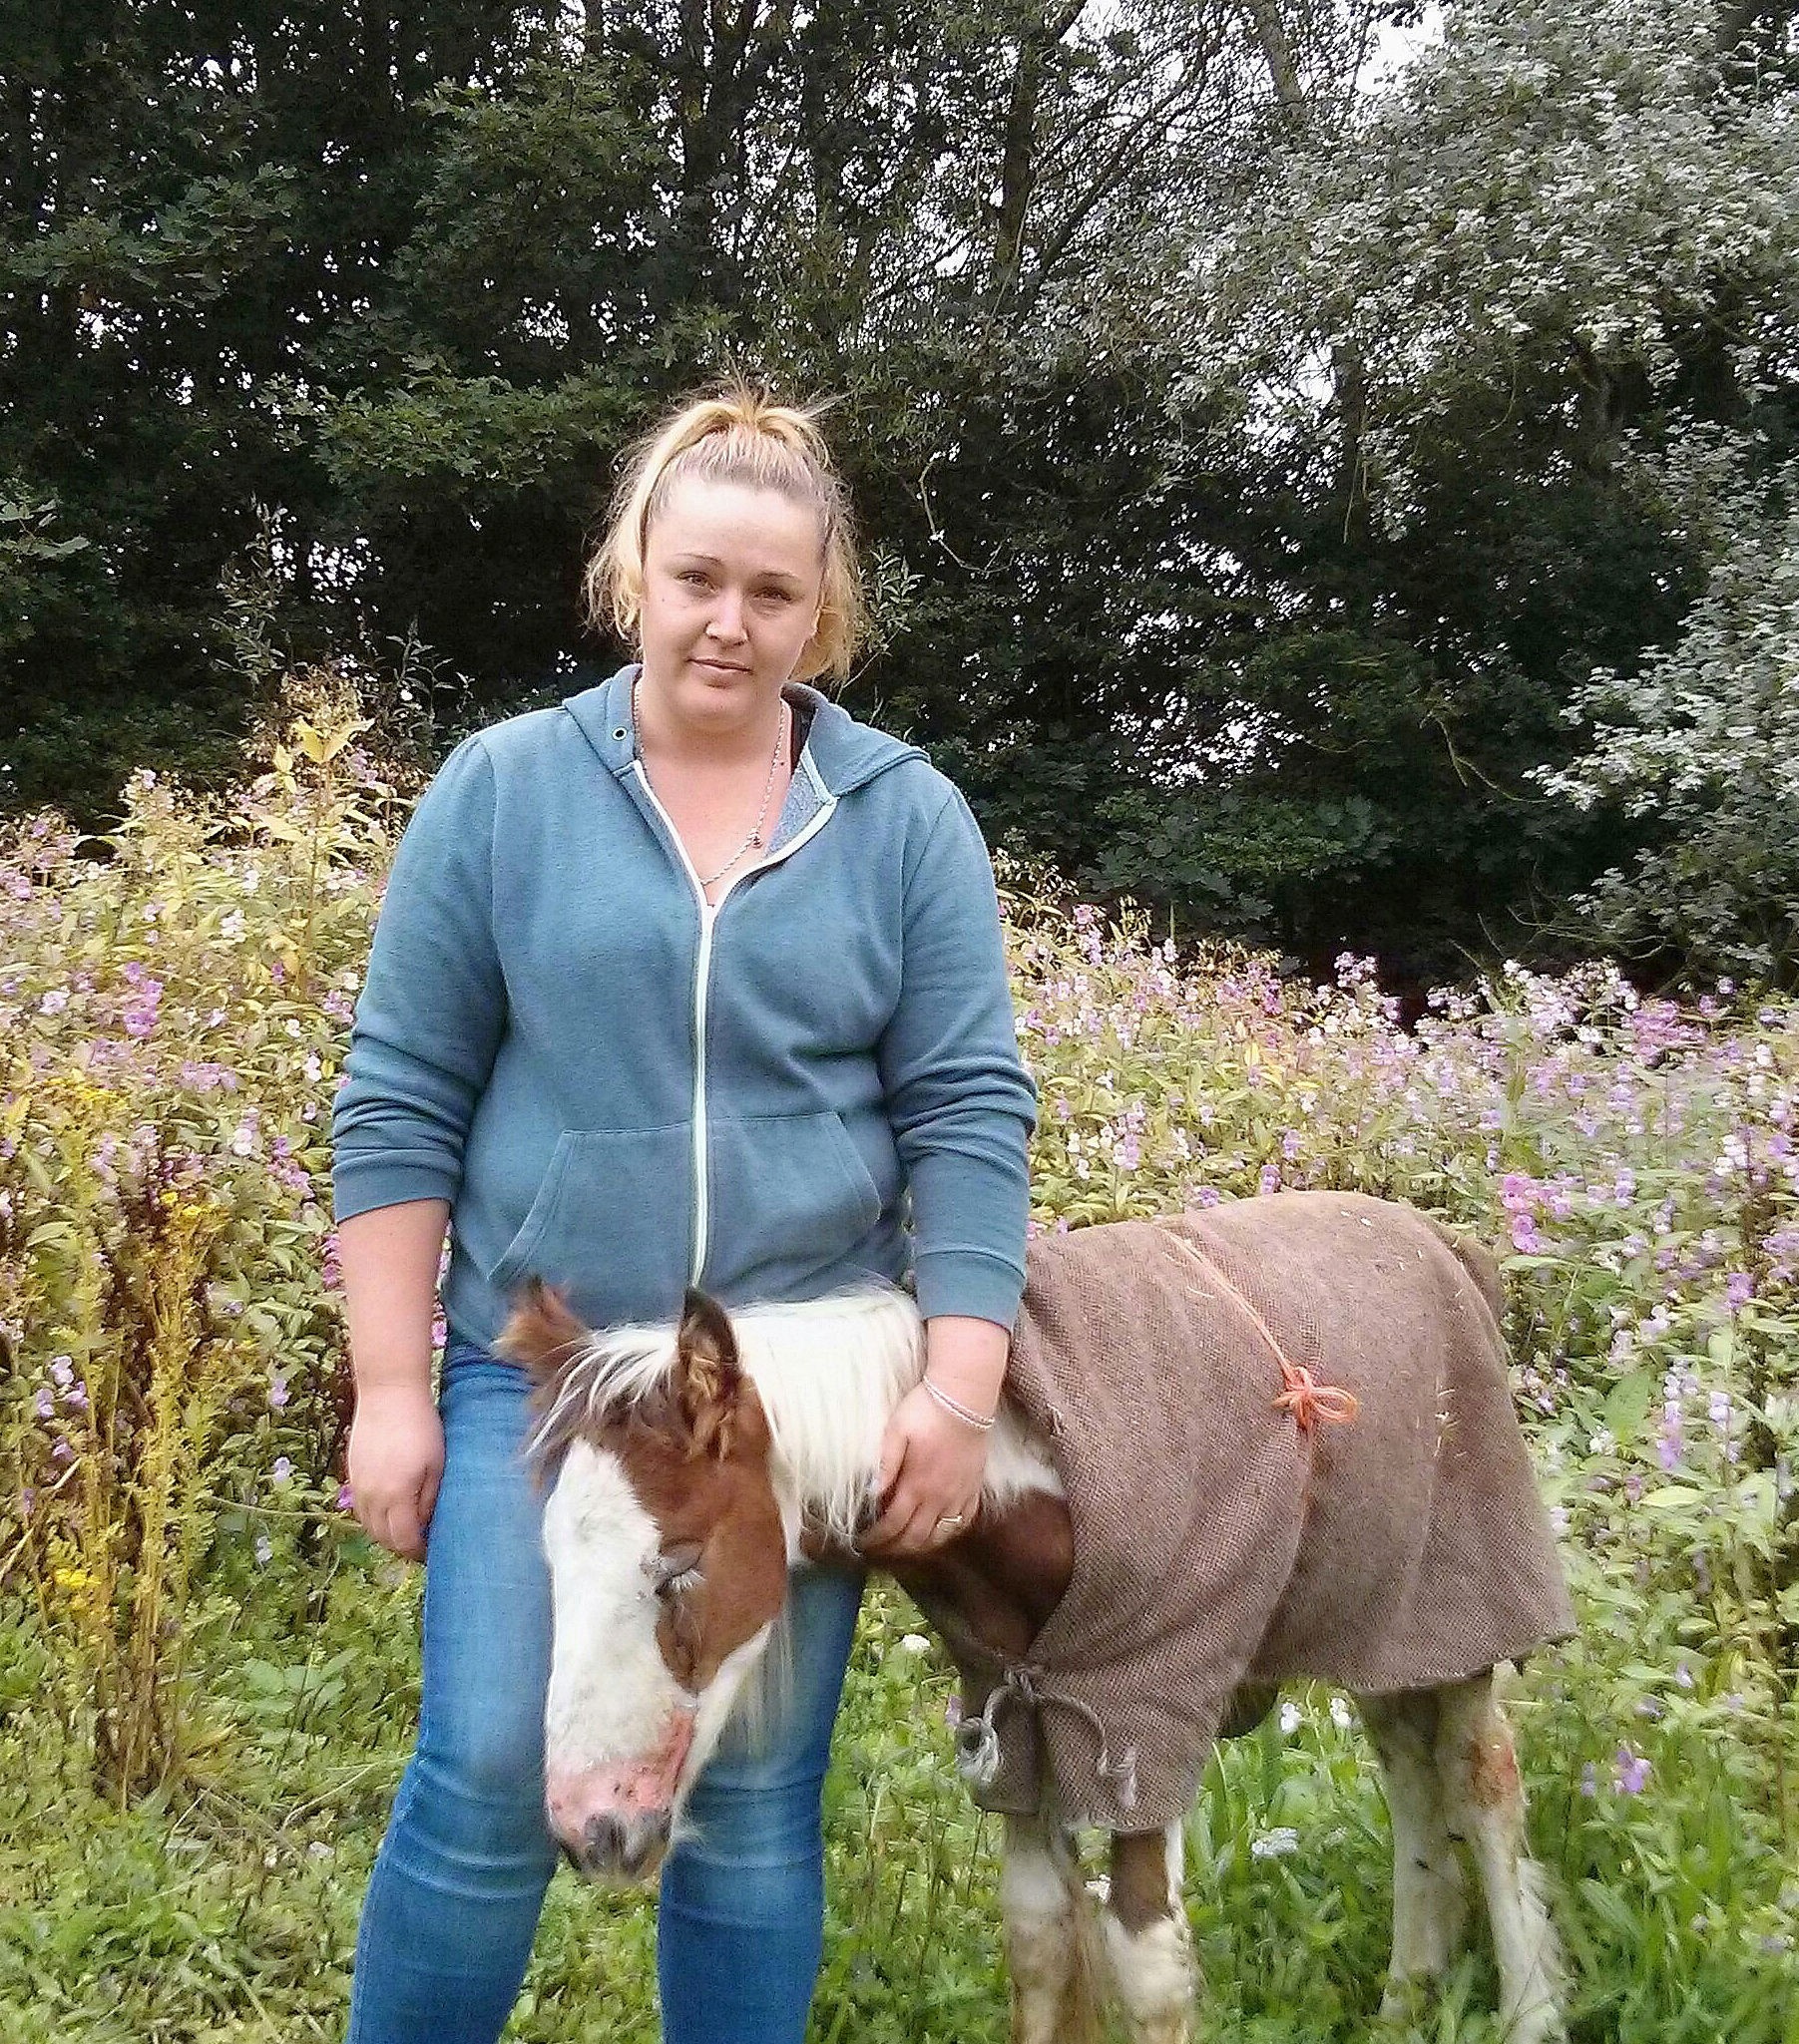 Owner Kayleigh Appleby with foal Angus